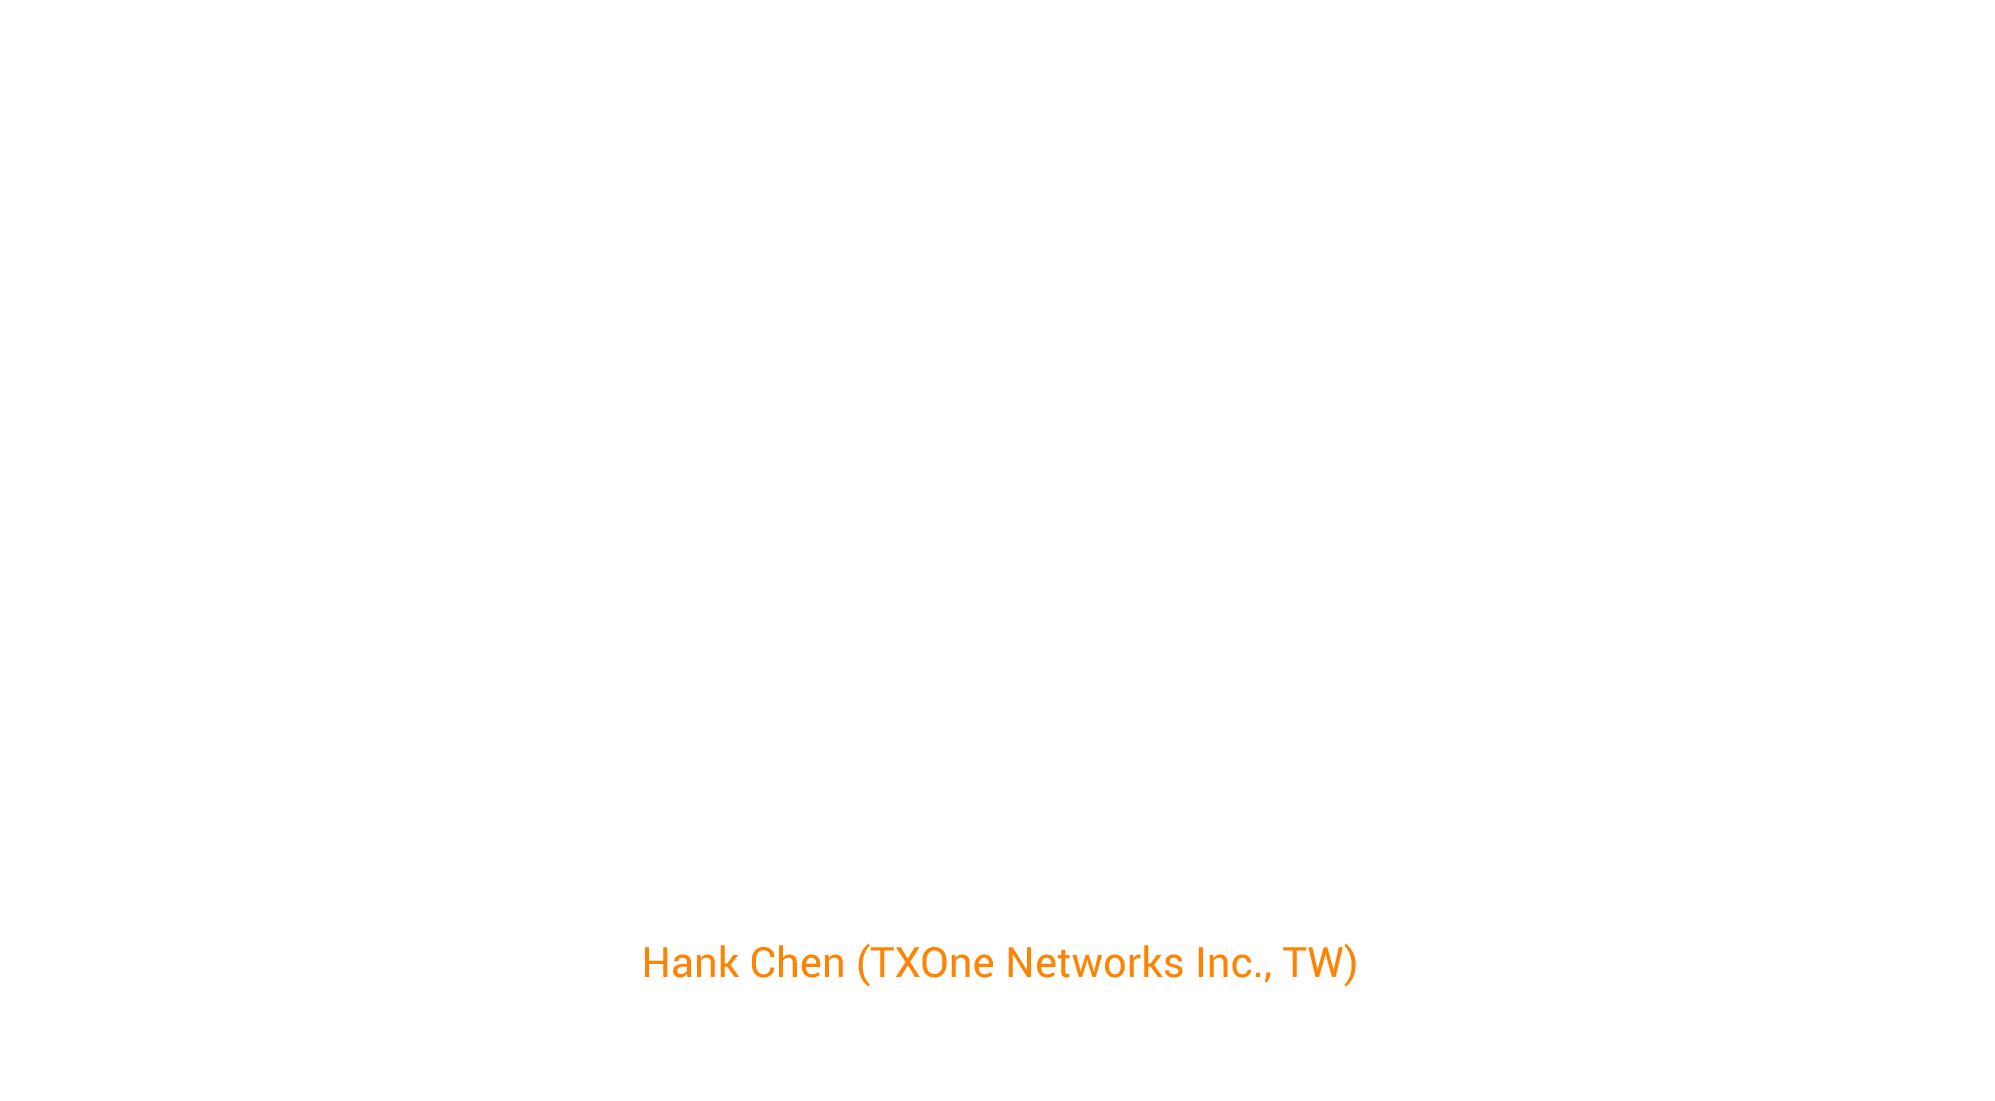 No More Ransomware in Critical Infrastructure!